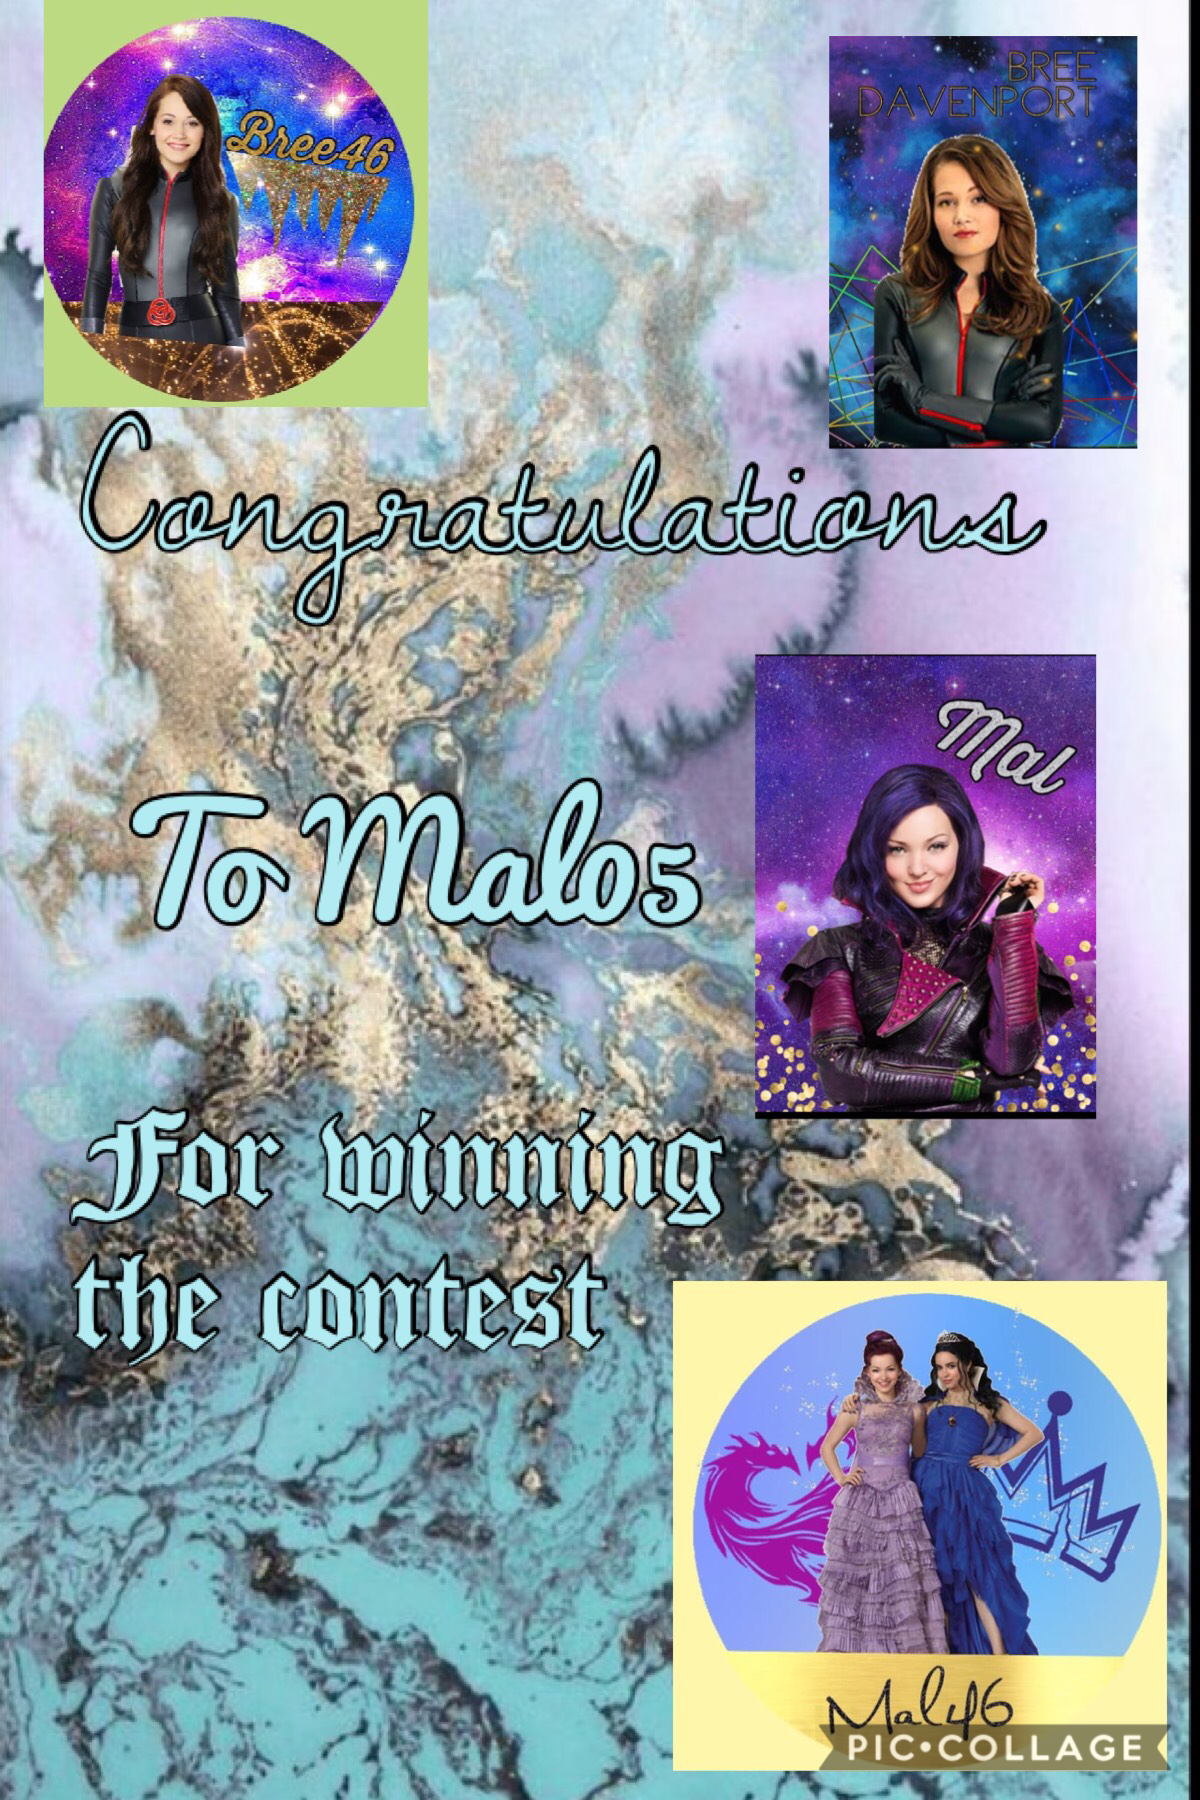 Congratulations to Mal05 for winning the contest 